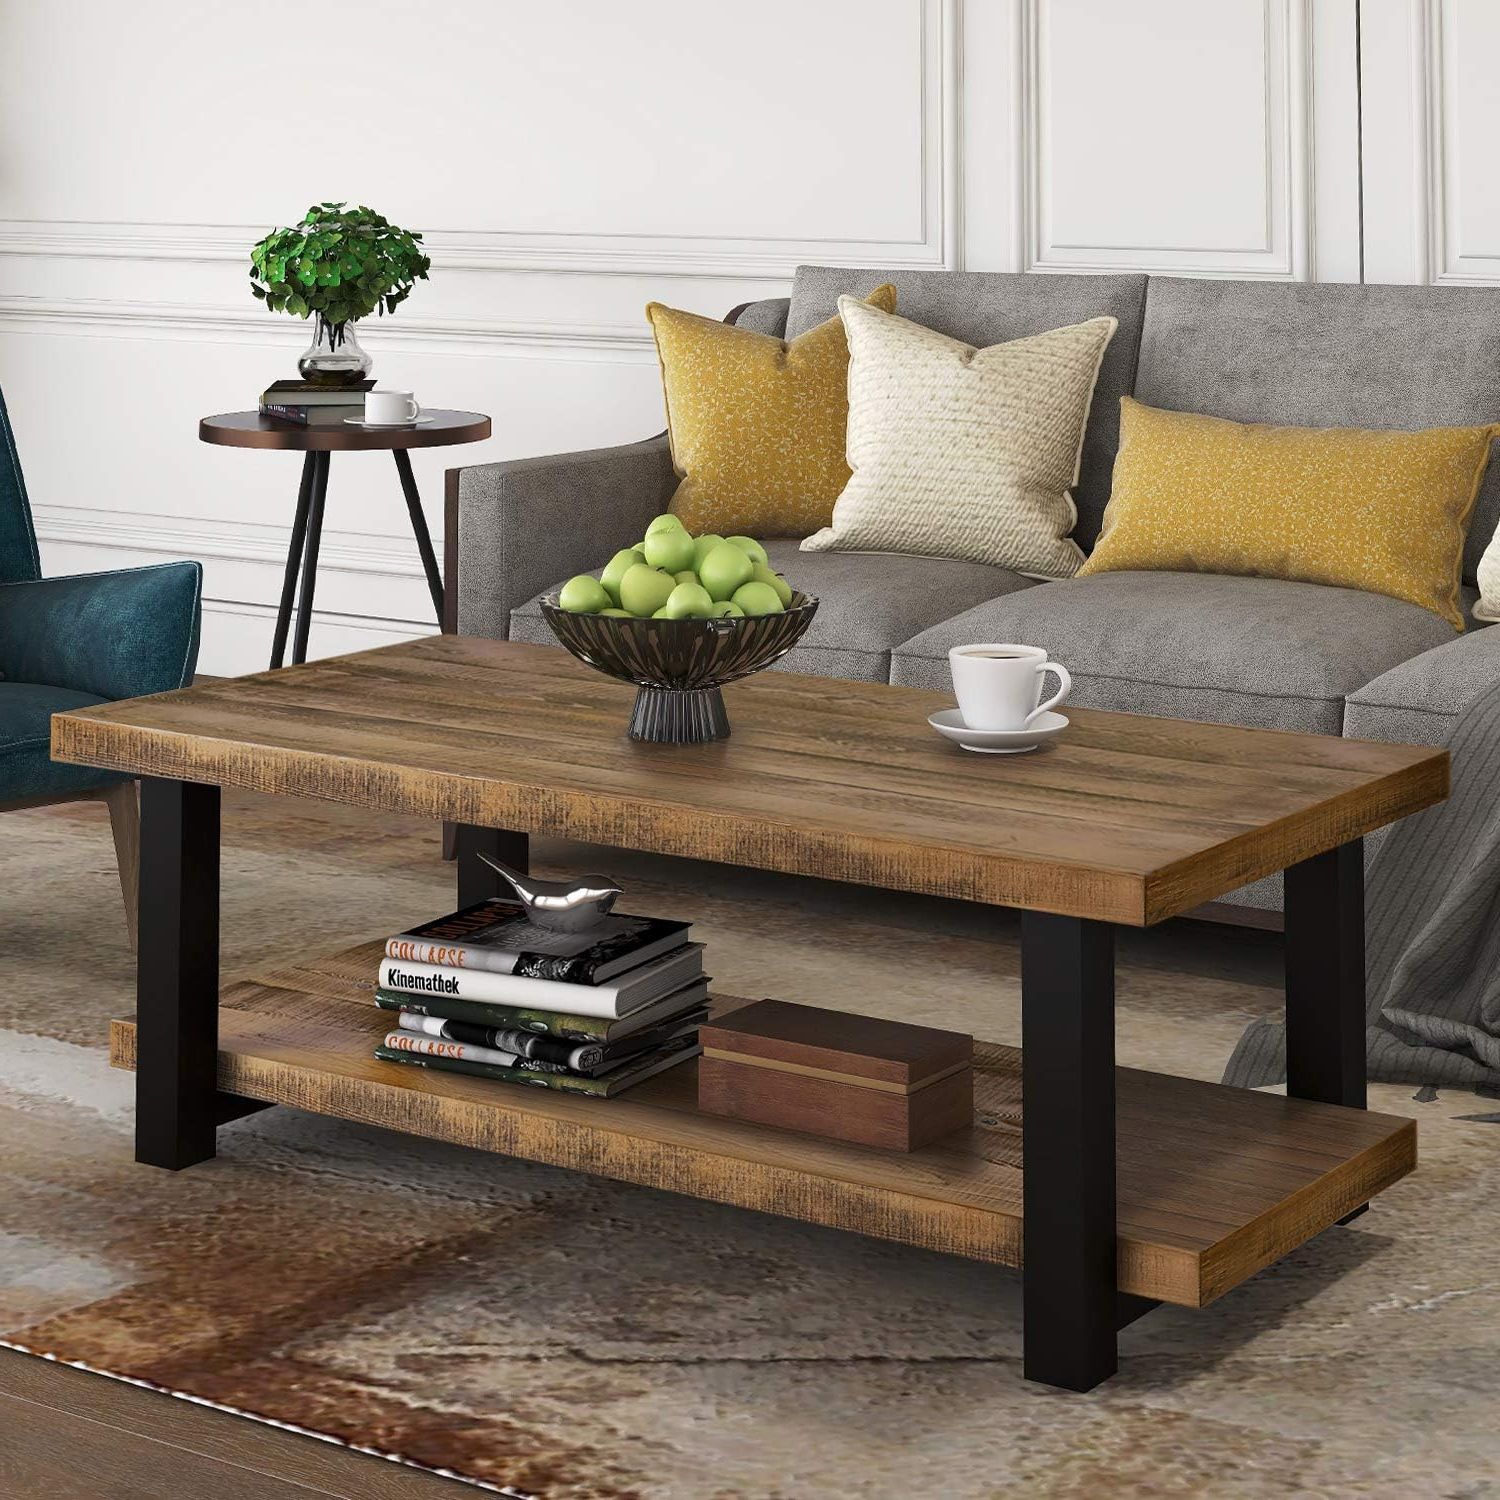 Amazon: Knocbel Farmhouse Coffee Table For Living Room, Sofa Side 2 With Regard To Best And Newest Wood Coffee Tables With 2 Tier Storage (View 8 of 15)